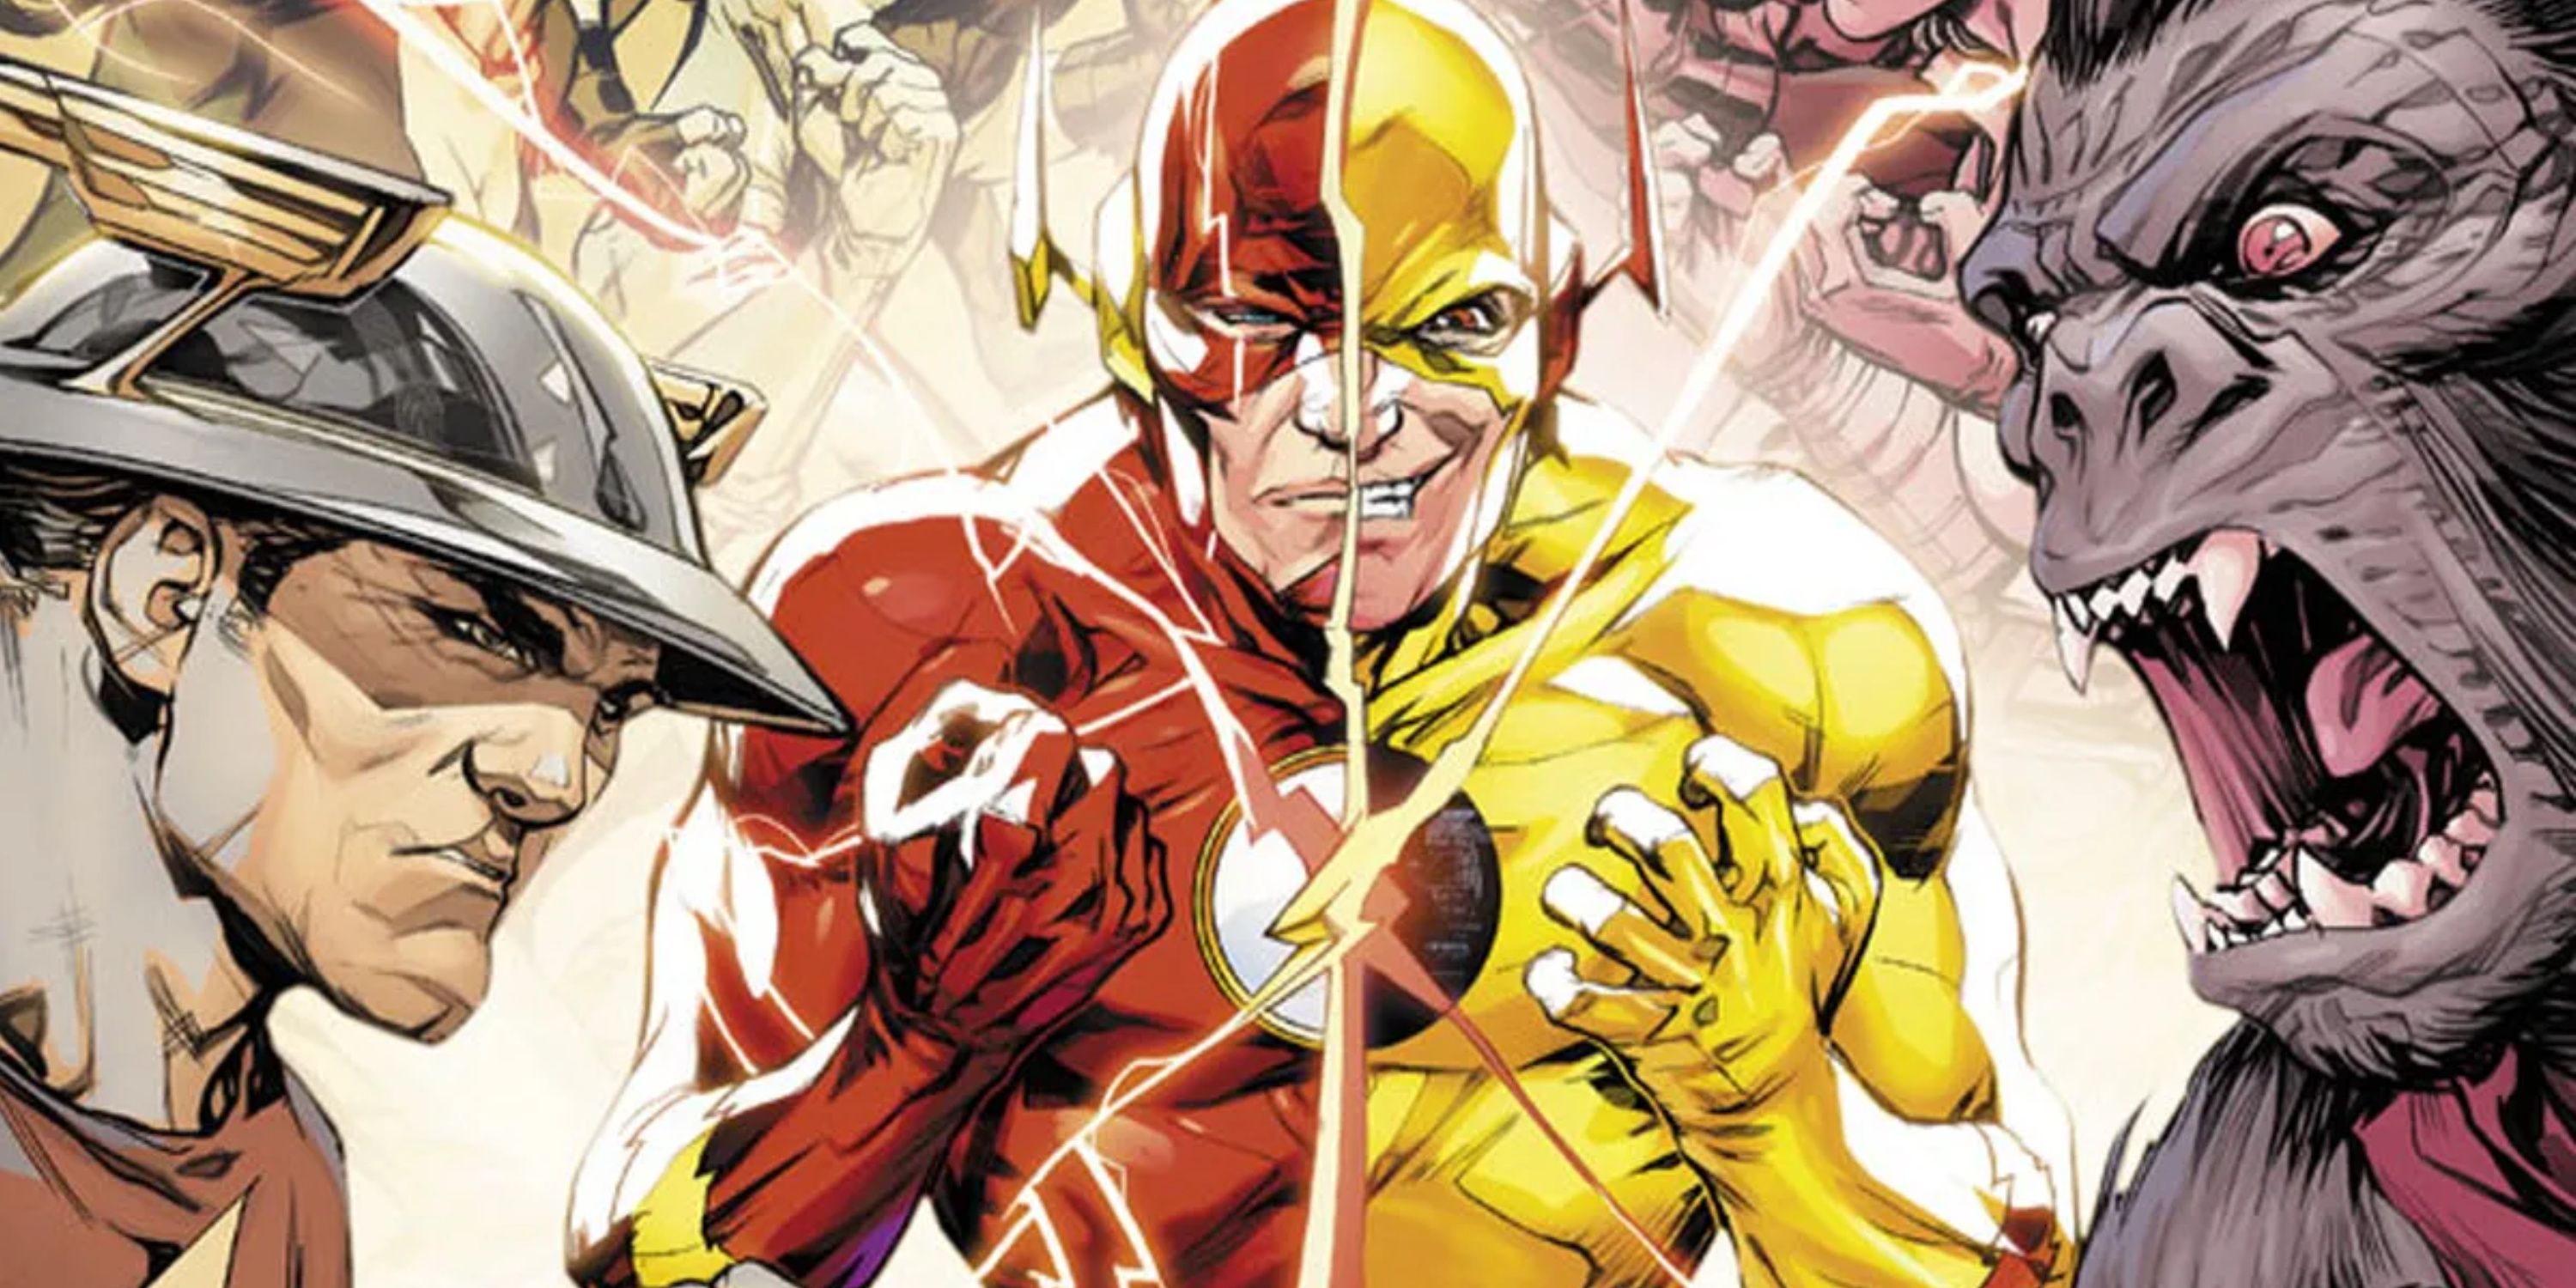 Golden Age Flash, Barry Allen, Reverse-Flash, and Grodd on a DC Comics cover